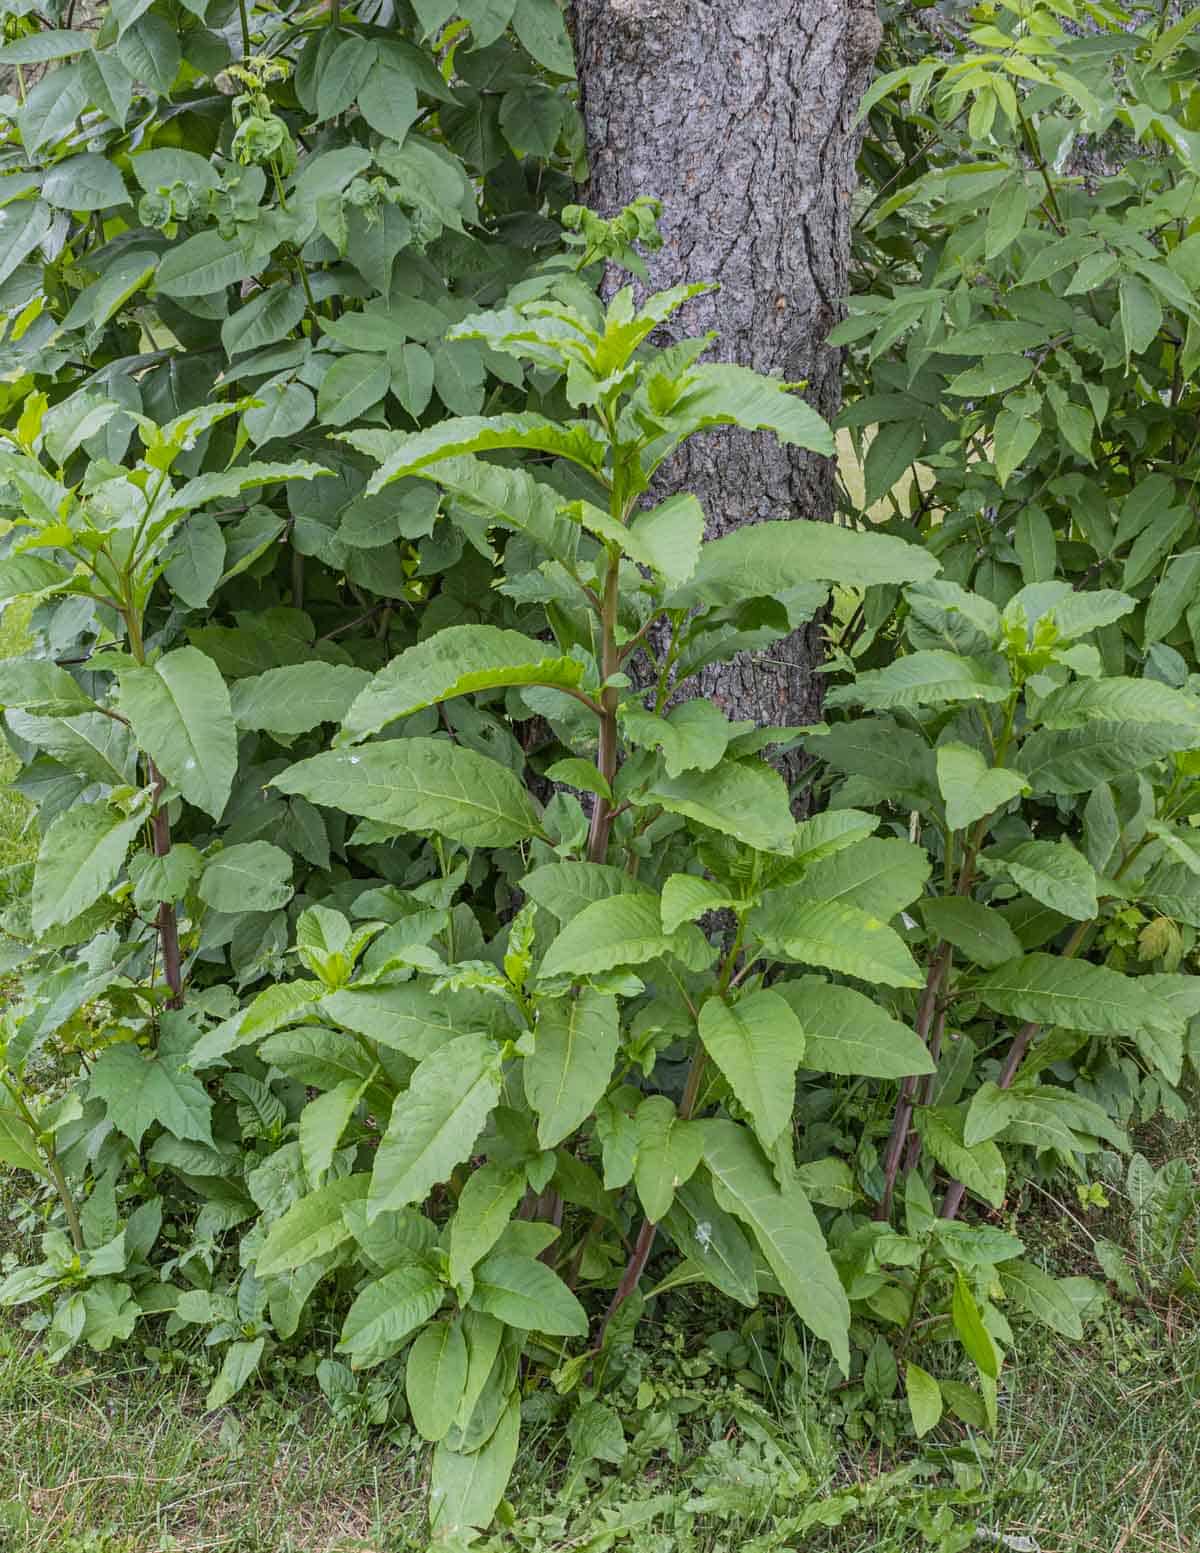 A mature pokeweed plant showing its red stem. 